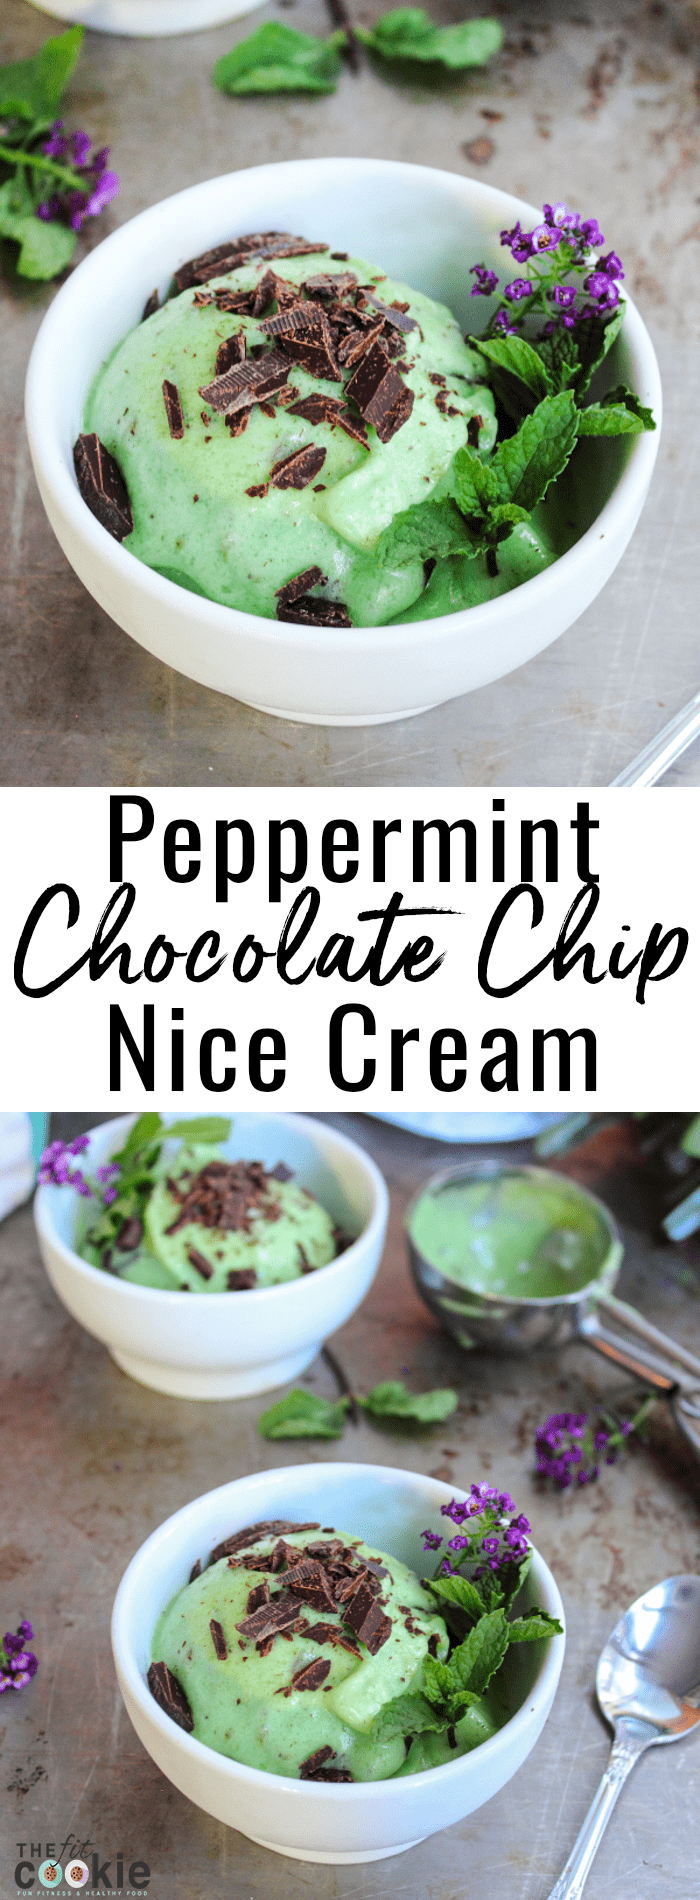 image collage of peppermint nice cream with chocolate